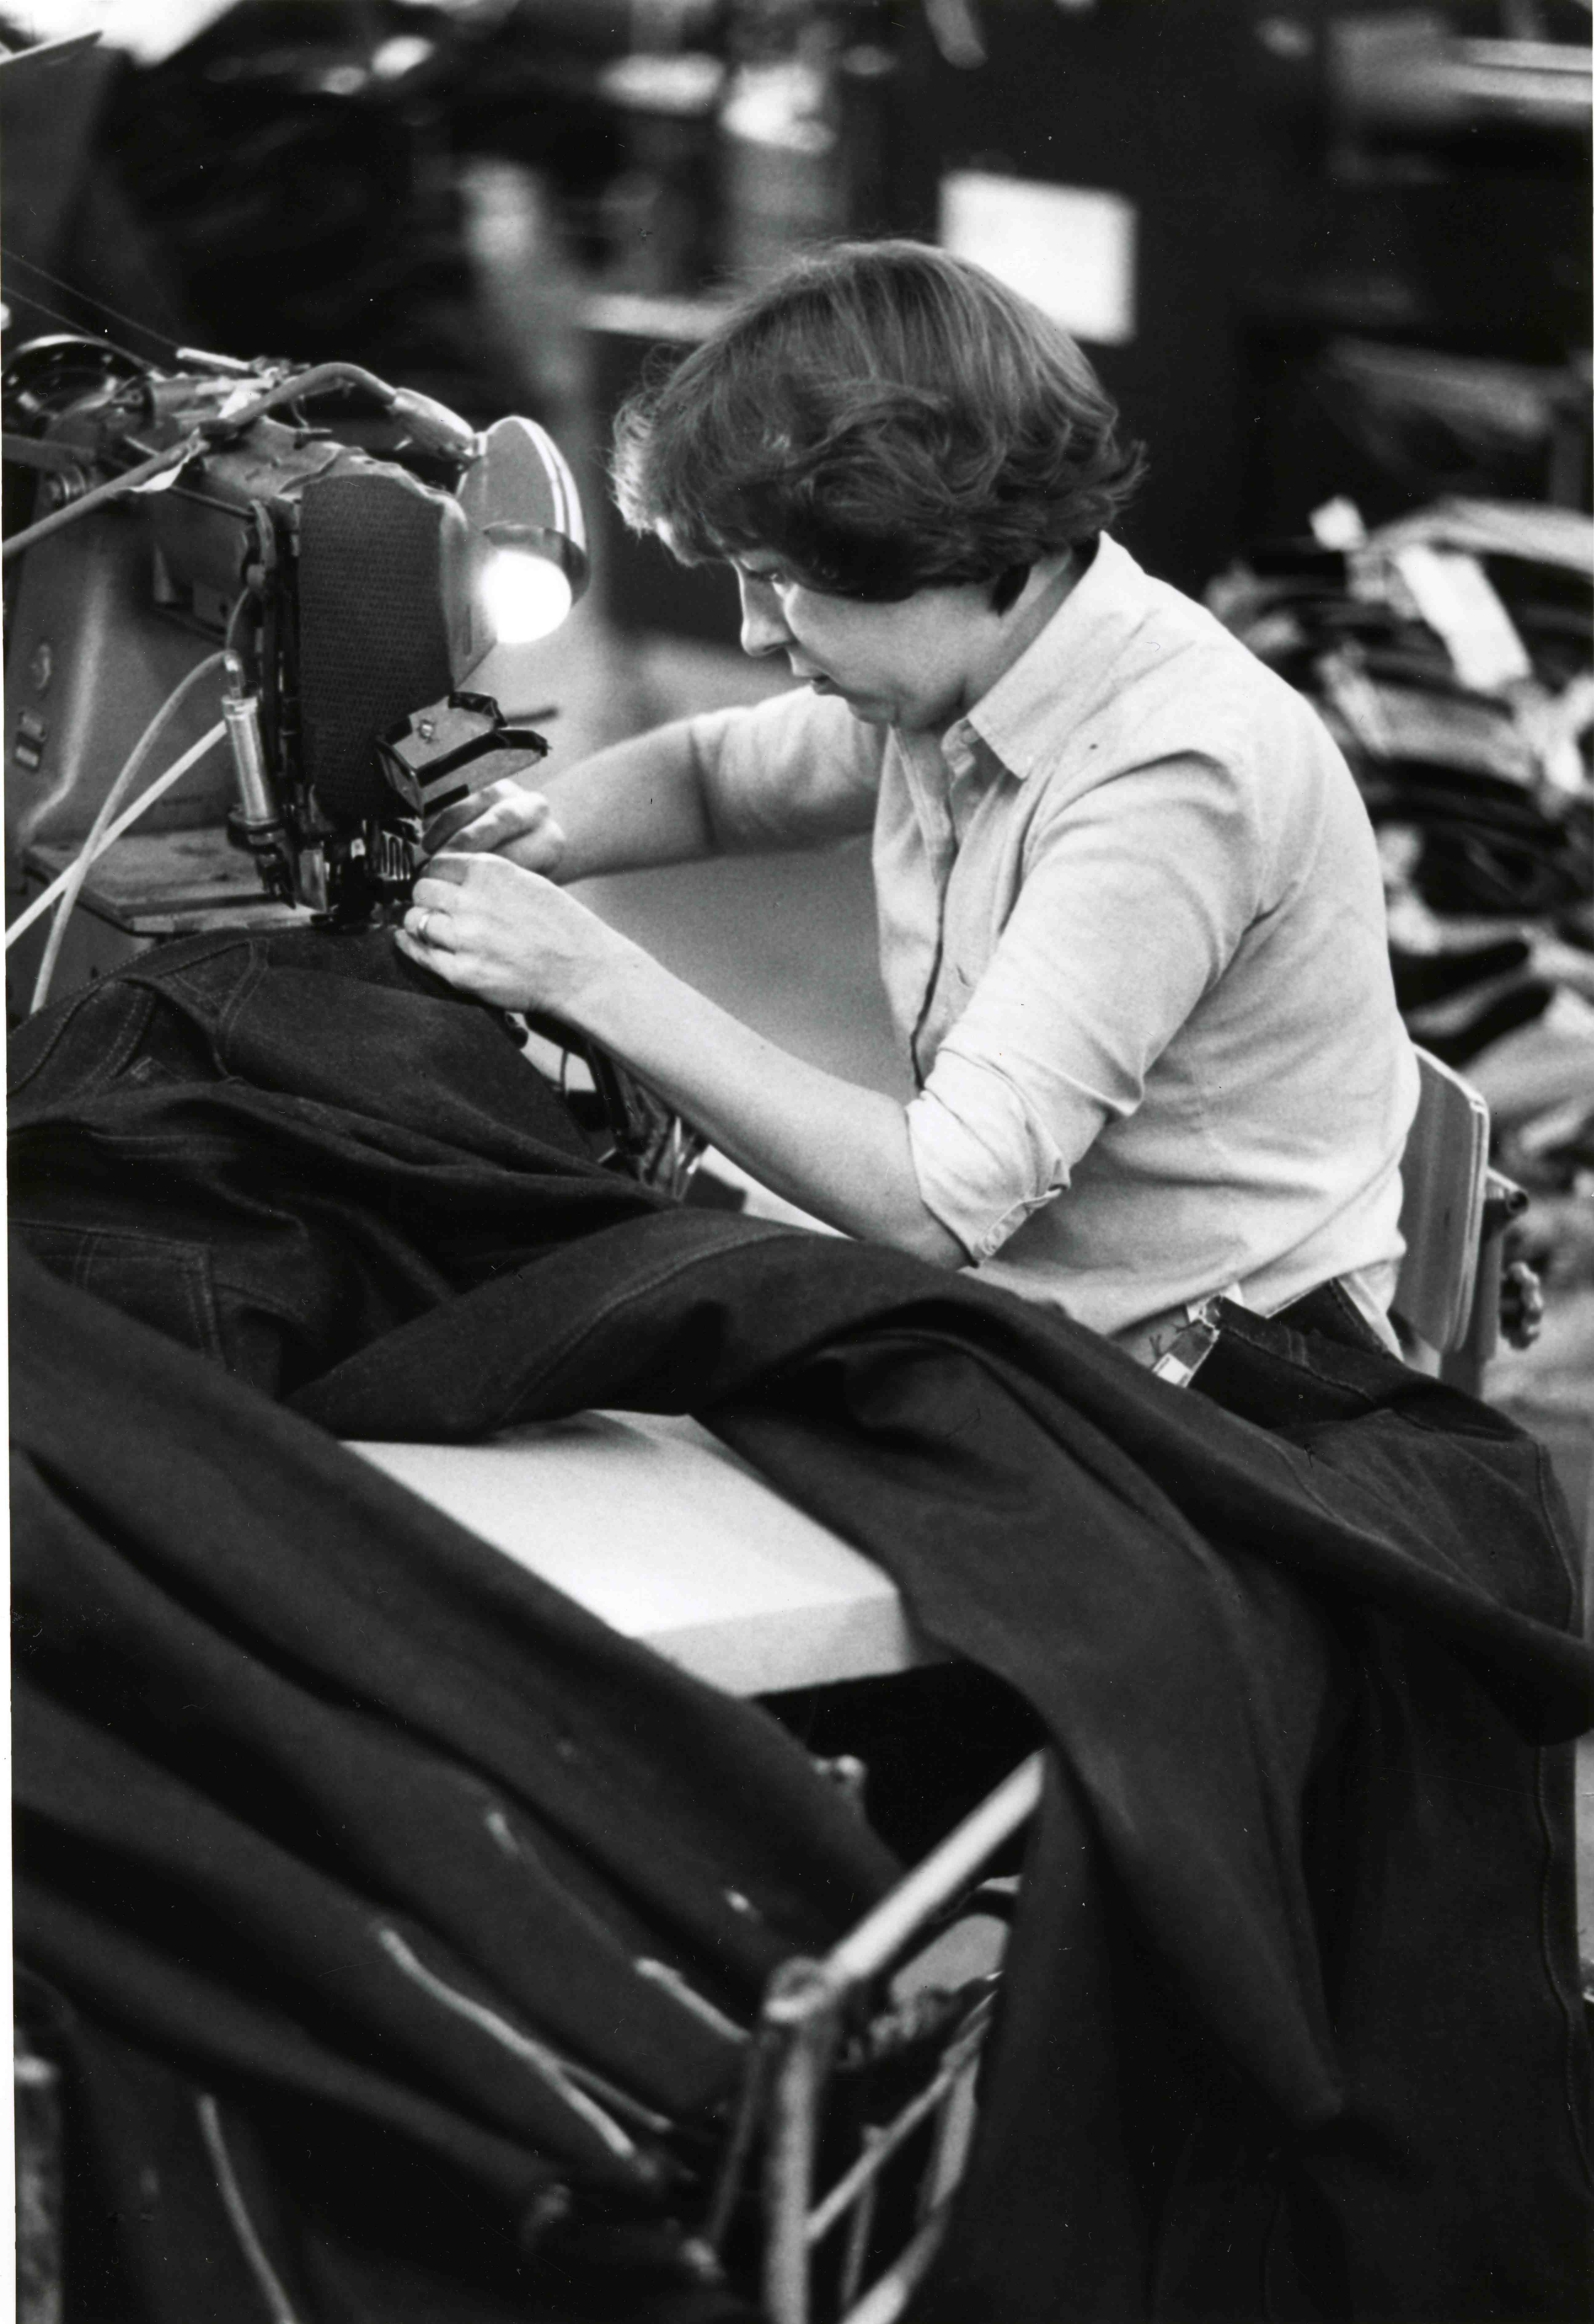 woman-with-bob-sewing-mtn-city-1987